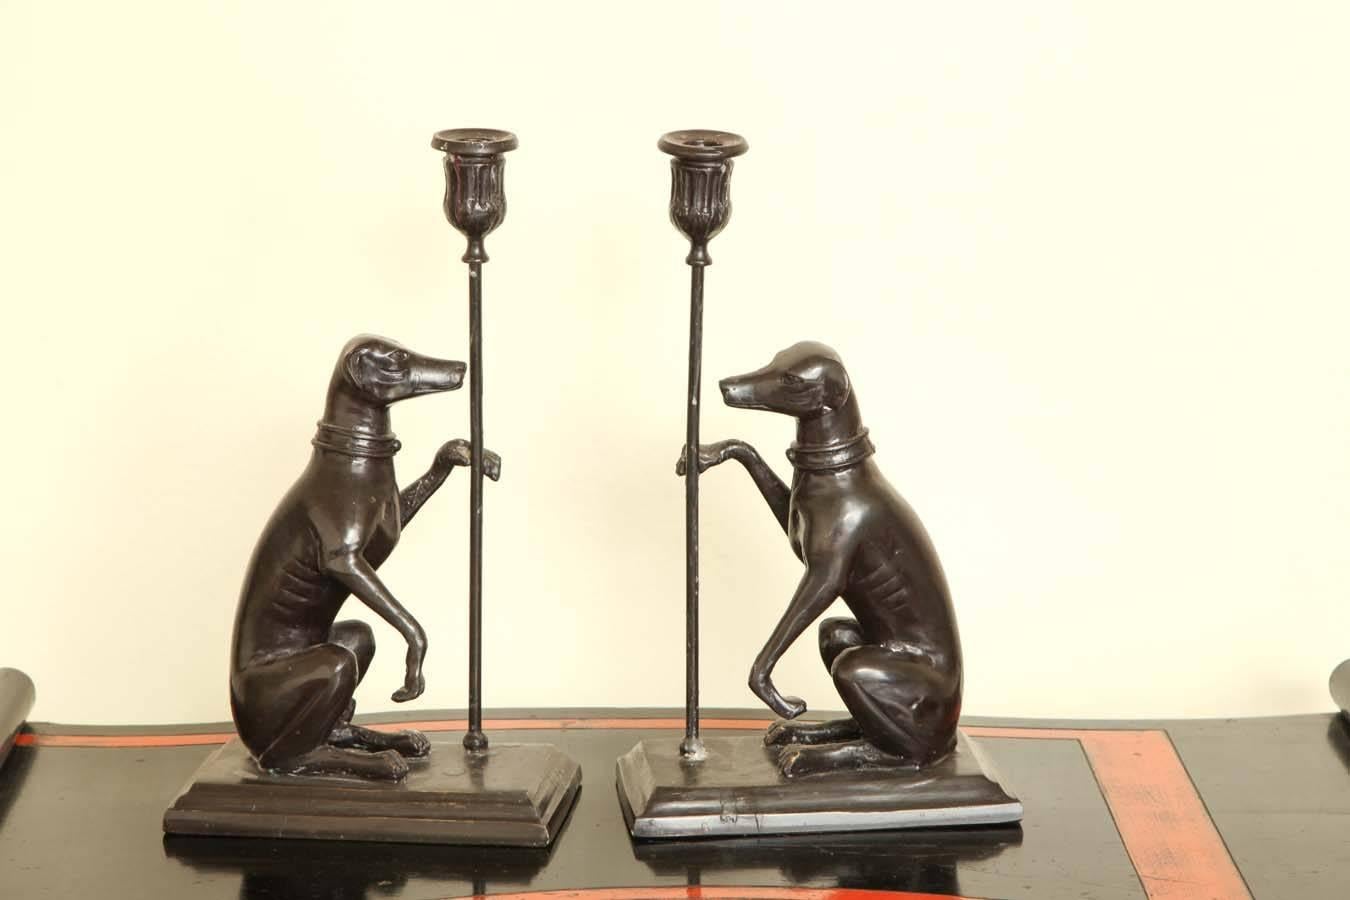 Each featuring a sitting greyhound with one raised paw supporting the candleholder.